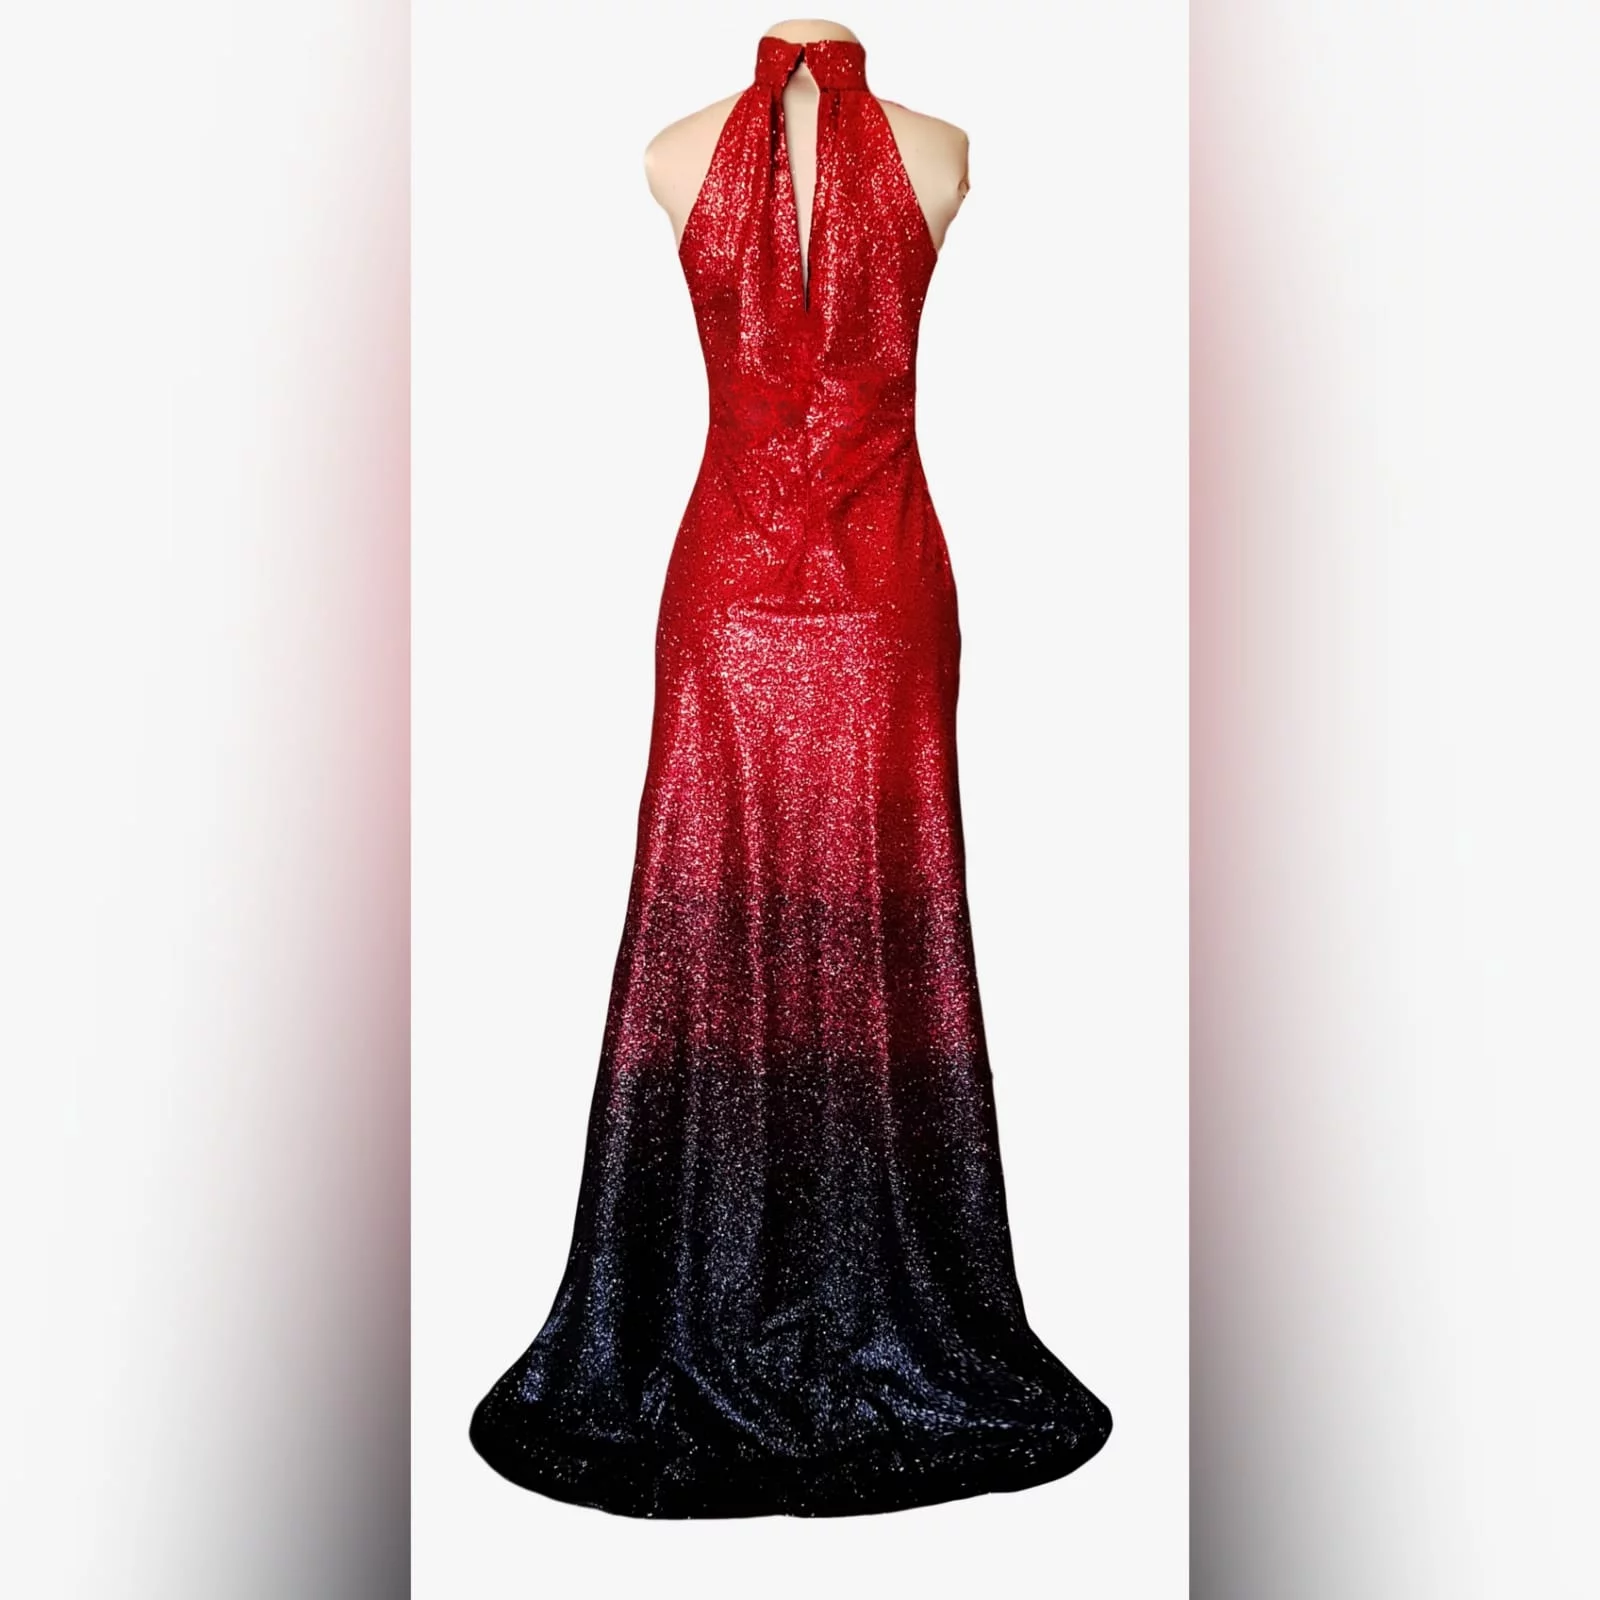 Glittered red and black ombre evening dress 10 want to be the shine at your prom gala? Wear a stunning fully glitter red and black ombre evening dress. With a high slit for a touch of sexy to your radical look.